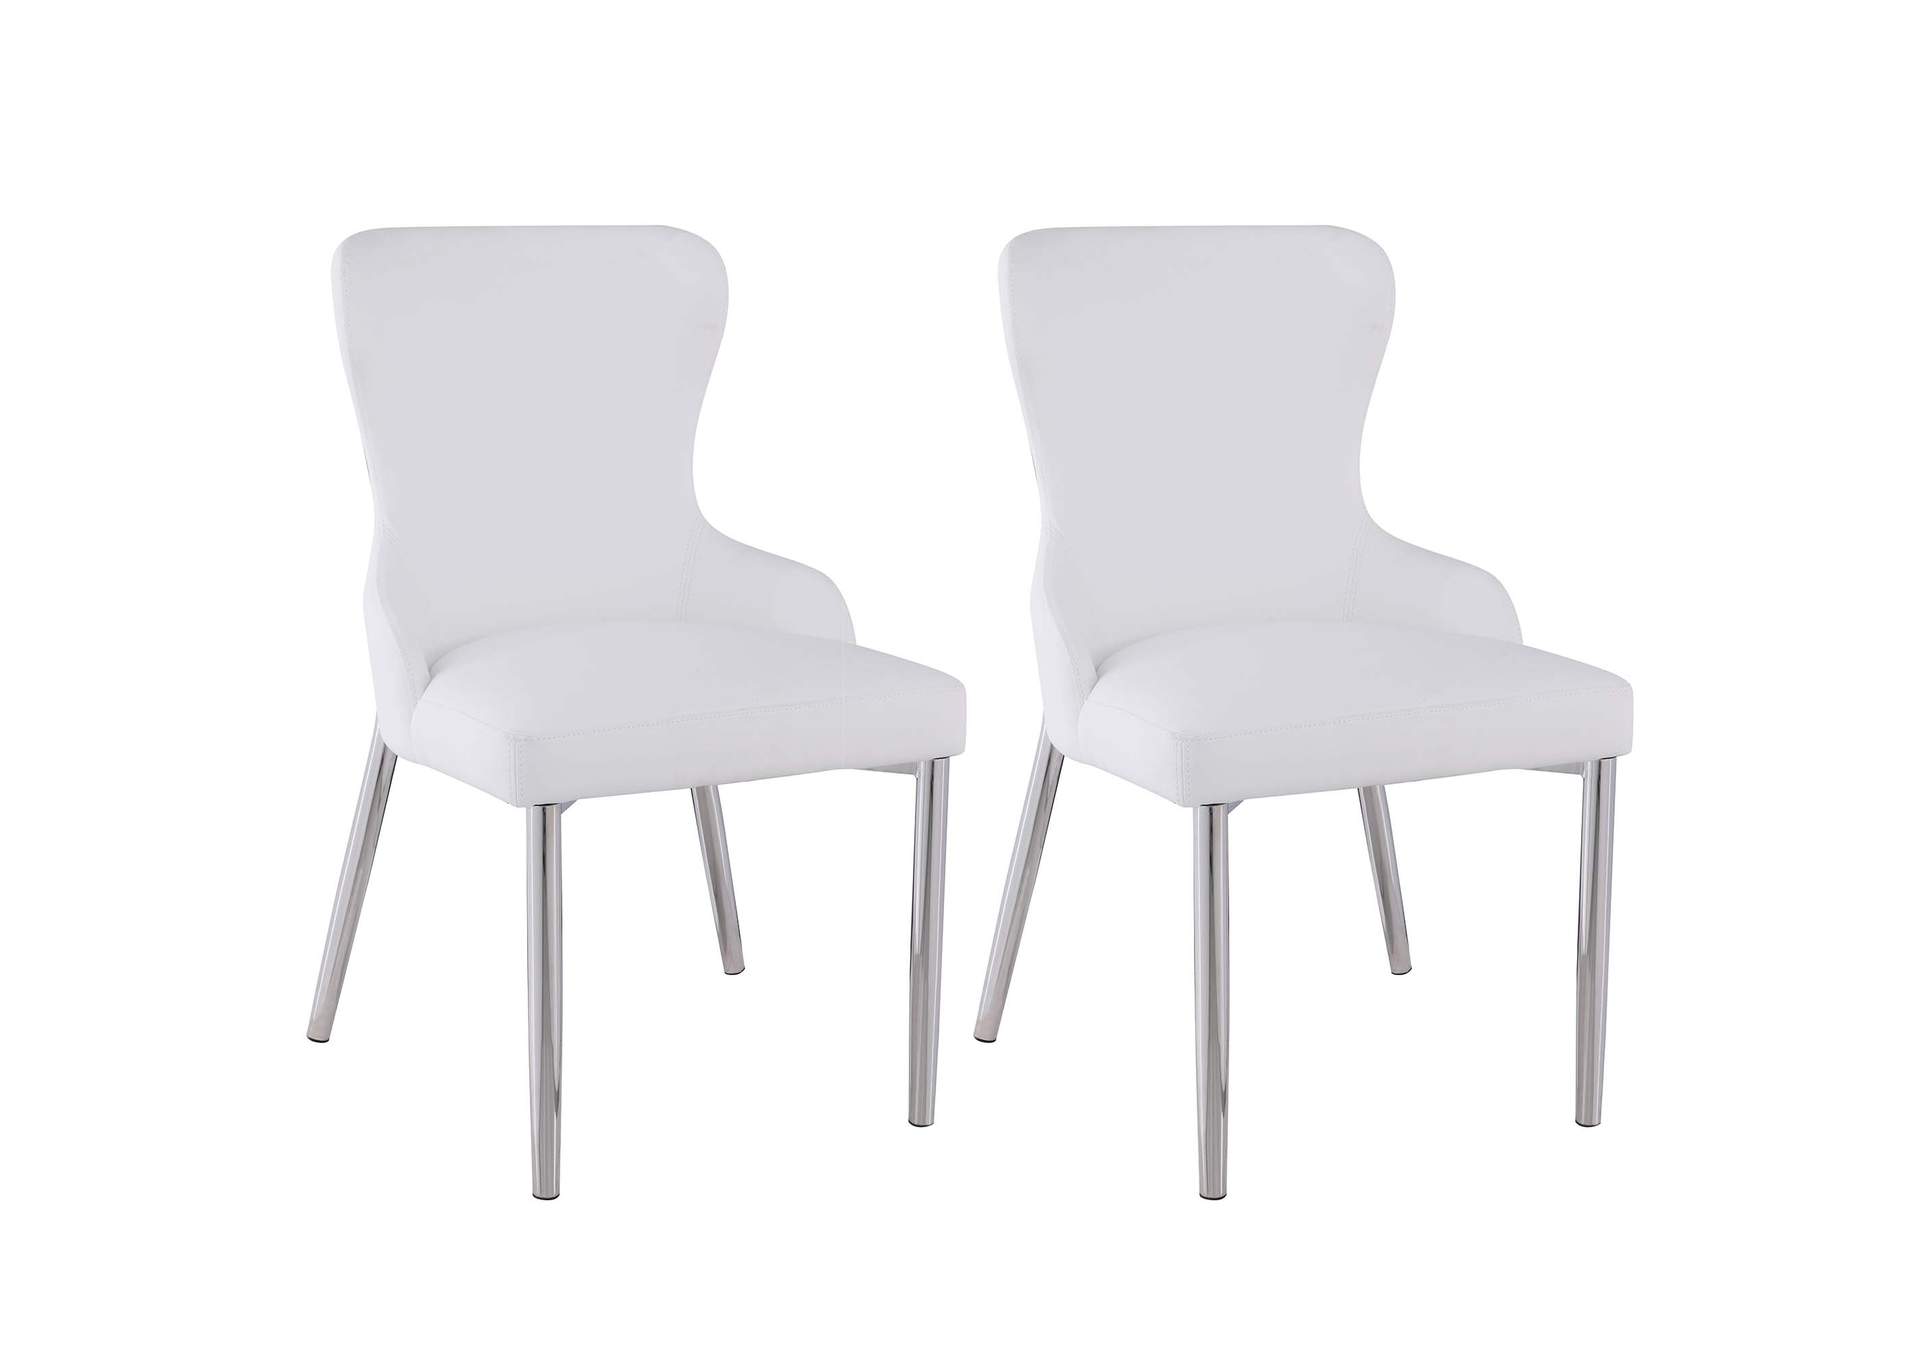 Contemporary Wing-Back Side Chair,Chintaly Imports